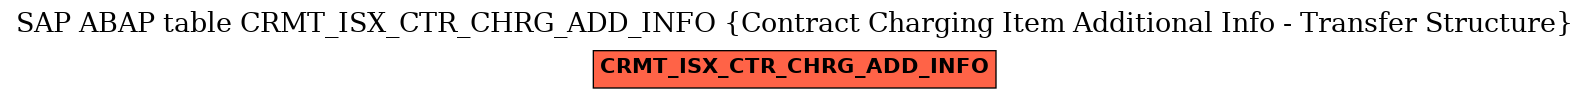 E-R Diagram for table CRMT_ISX_CTR_CHRG_ADD_INFO (Contract Charging Item Additional Info - Transfer Structure)